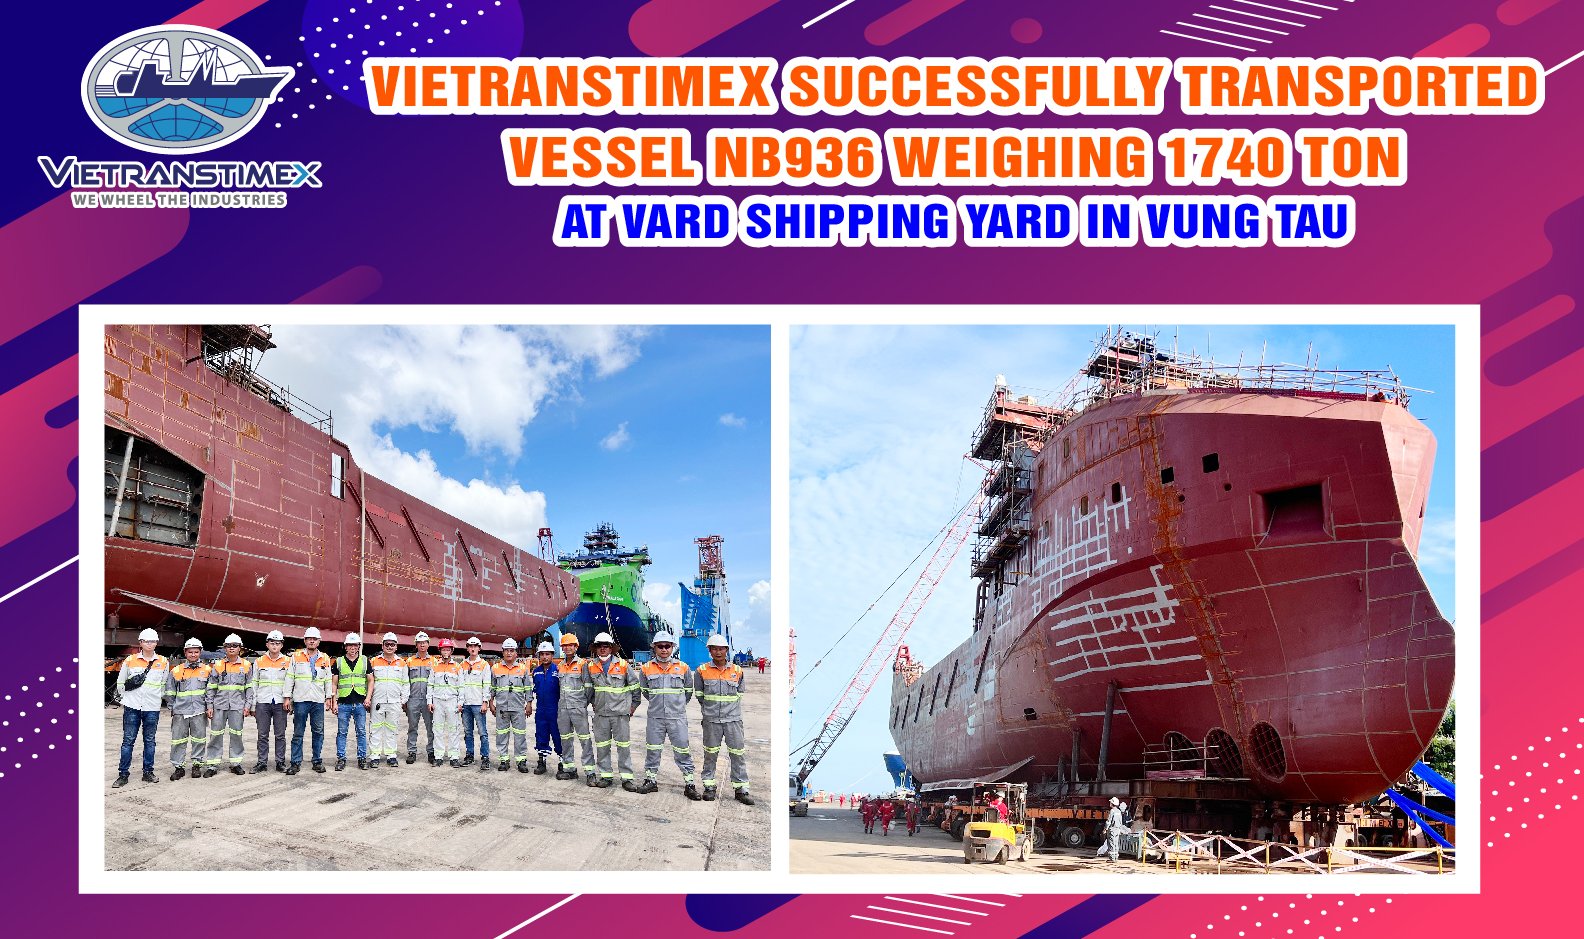 Load-out Vessel NB936 weighing 1740 ton at VARD Shipping yard in Vung Tau